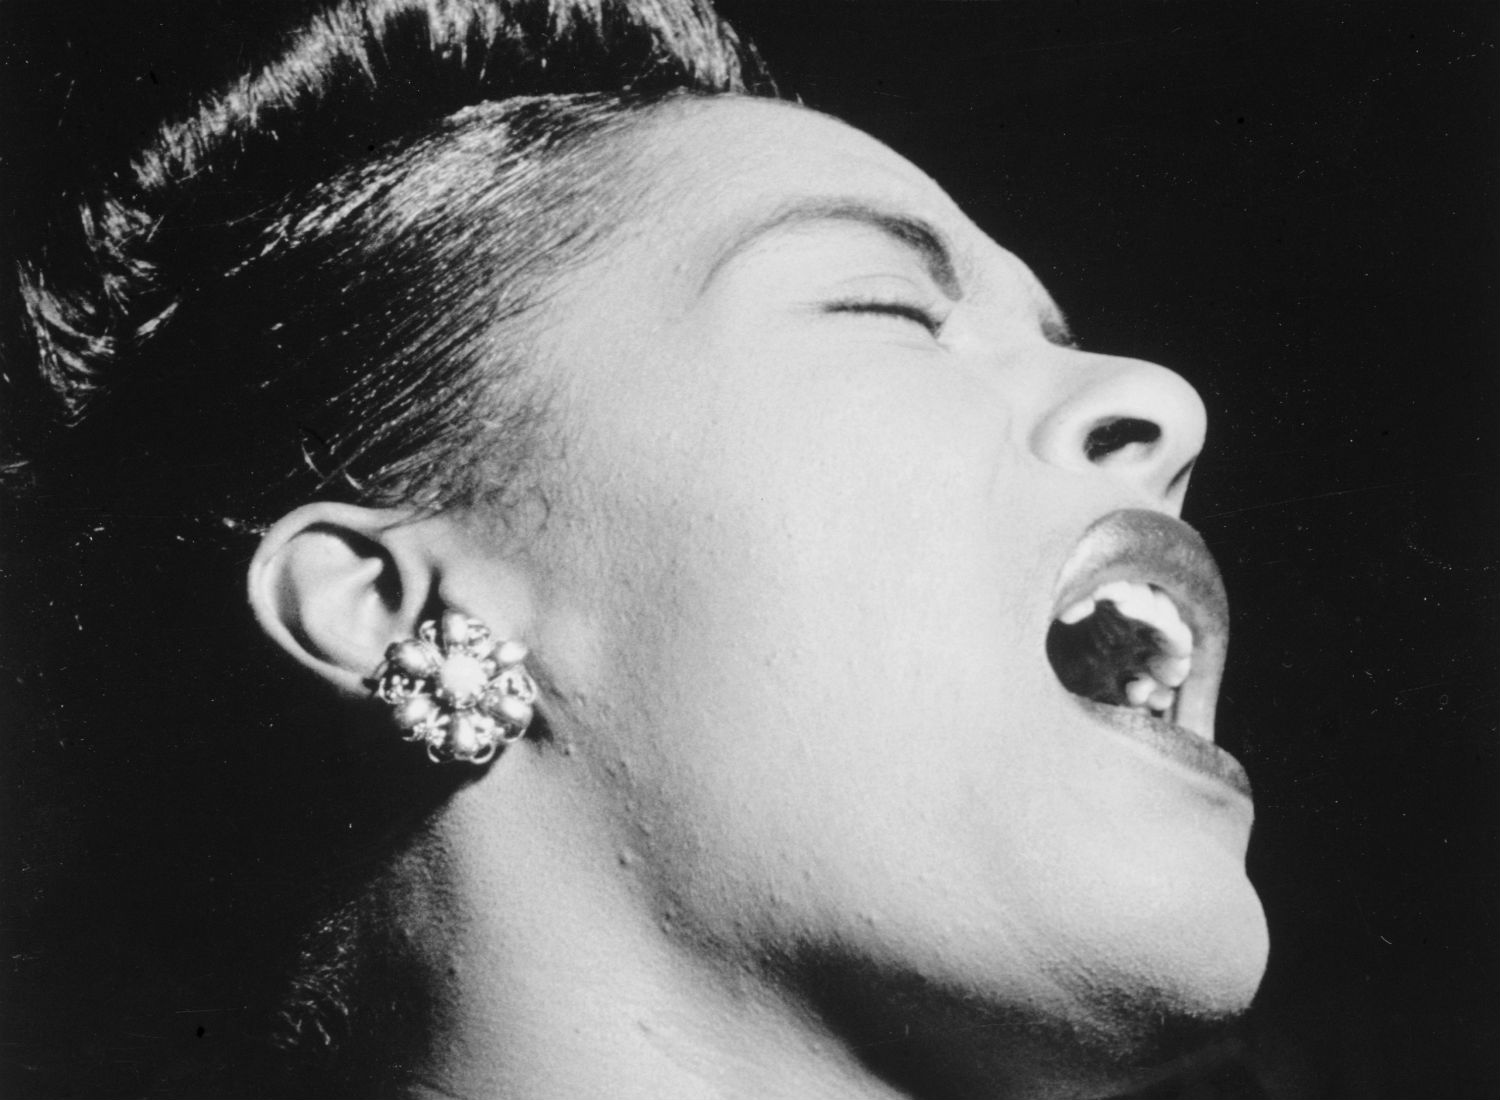 Loving Billie Holiday Doesn’t Mean Black Girls Aren’t Suffering